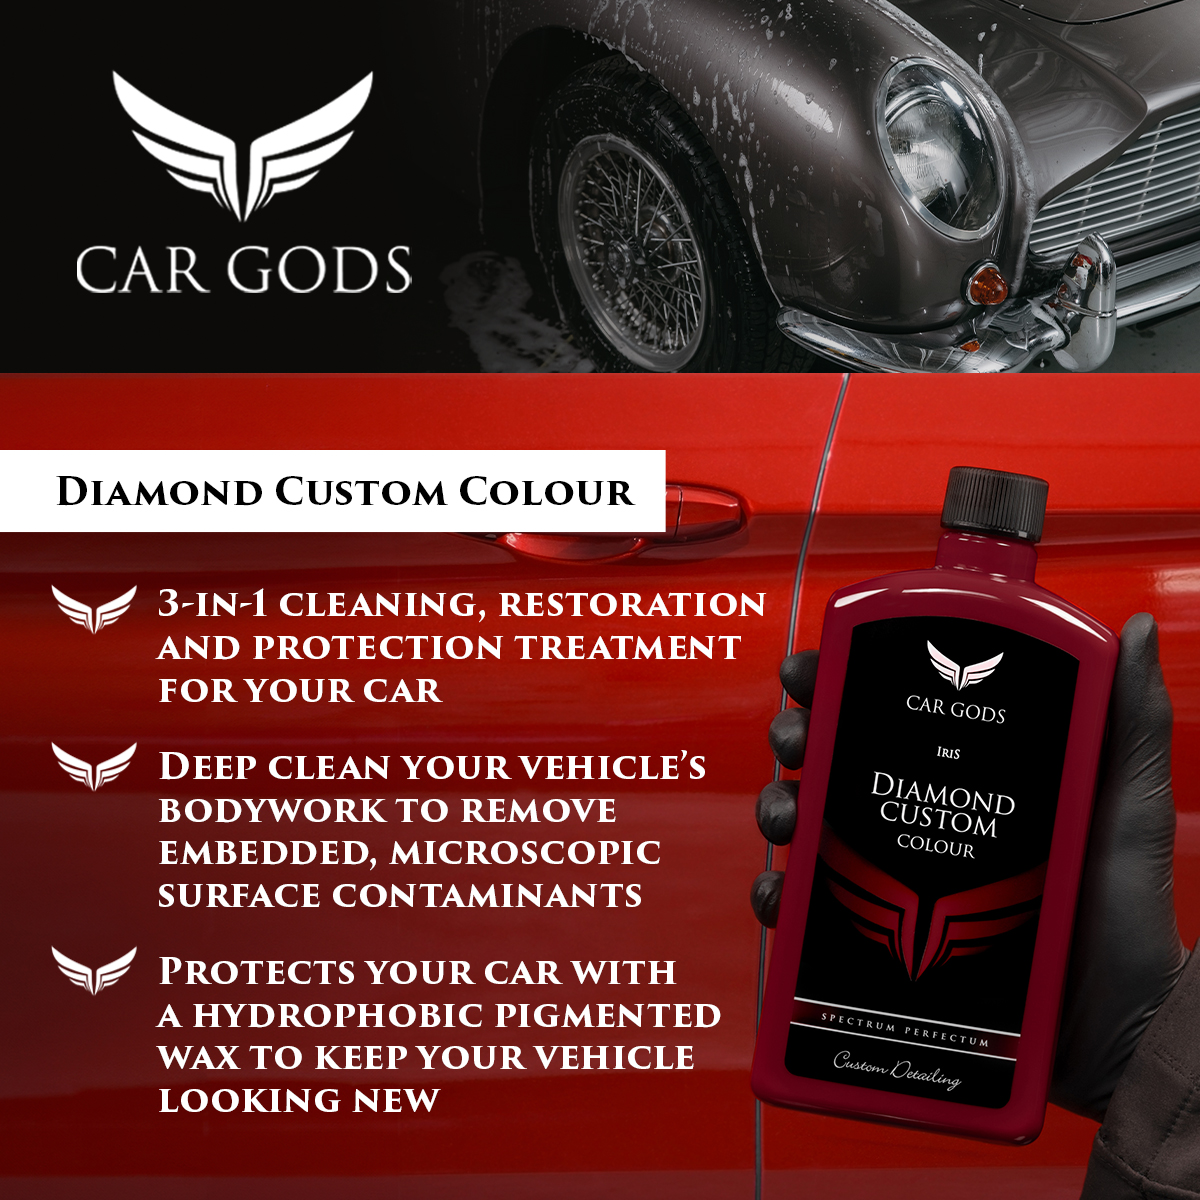 Car Gods Diamond Custom Colour. 3-in-1 cleaning, restoration and protection treatment for your car. Deep clean your vehicle’s bodywork to remove embedded, microscopic surface contaminants. Diamond Custom Colour restores paintwork by gently removing surface oxidation, blemishes and minor scratches, and it protects your car with a hydrophobic pigmented wax to keep your vehicle looking new.